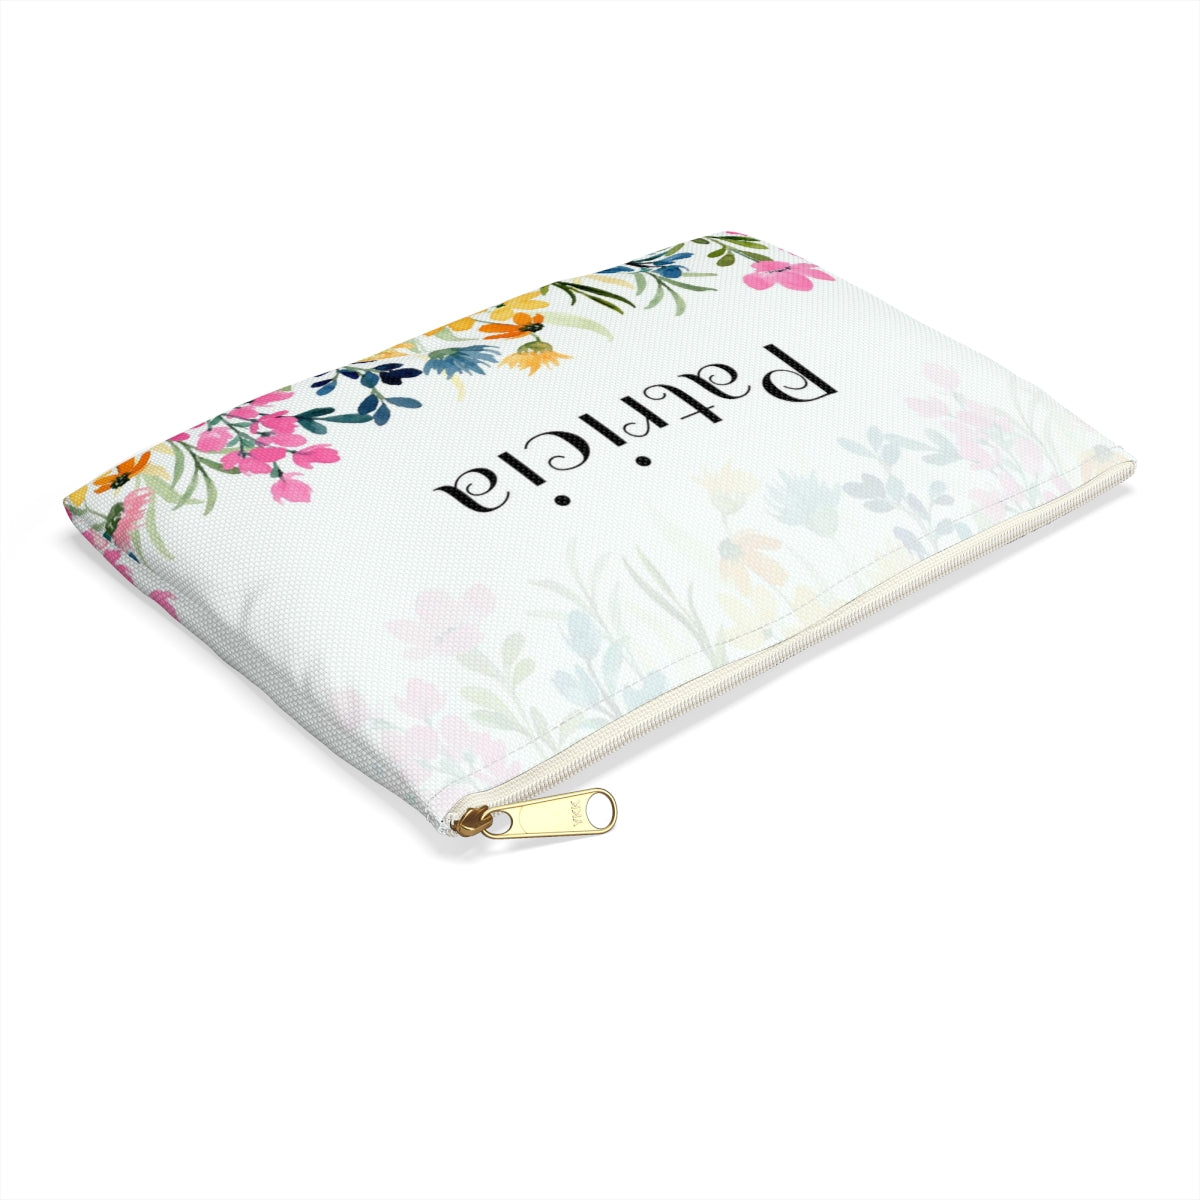 Custom Best Friend Gift, Wildflowers Makeup Bag Personalized Name Case Floral Monogram Zipper Travel Cosmetics Pouch Starcove Fashion